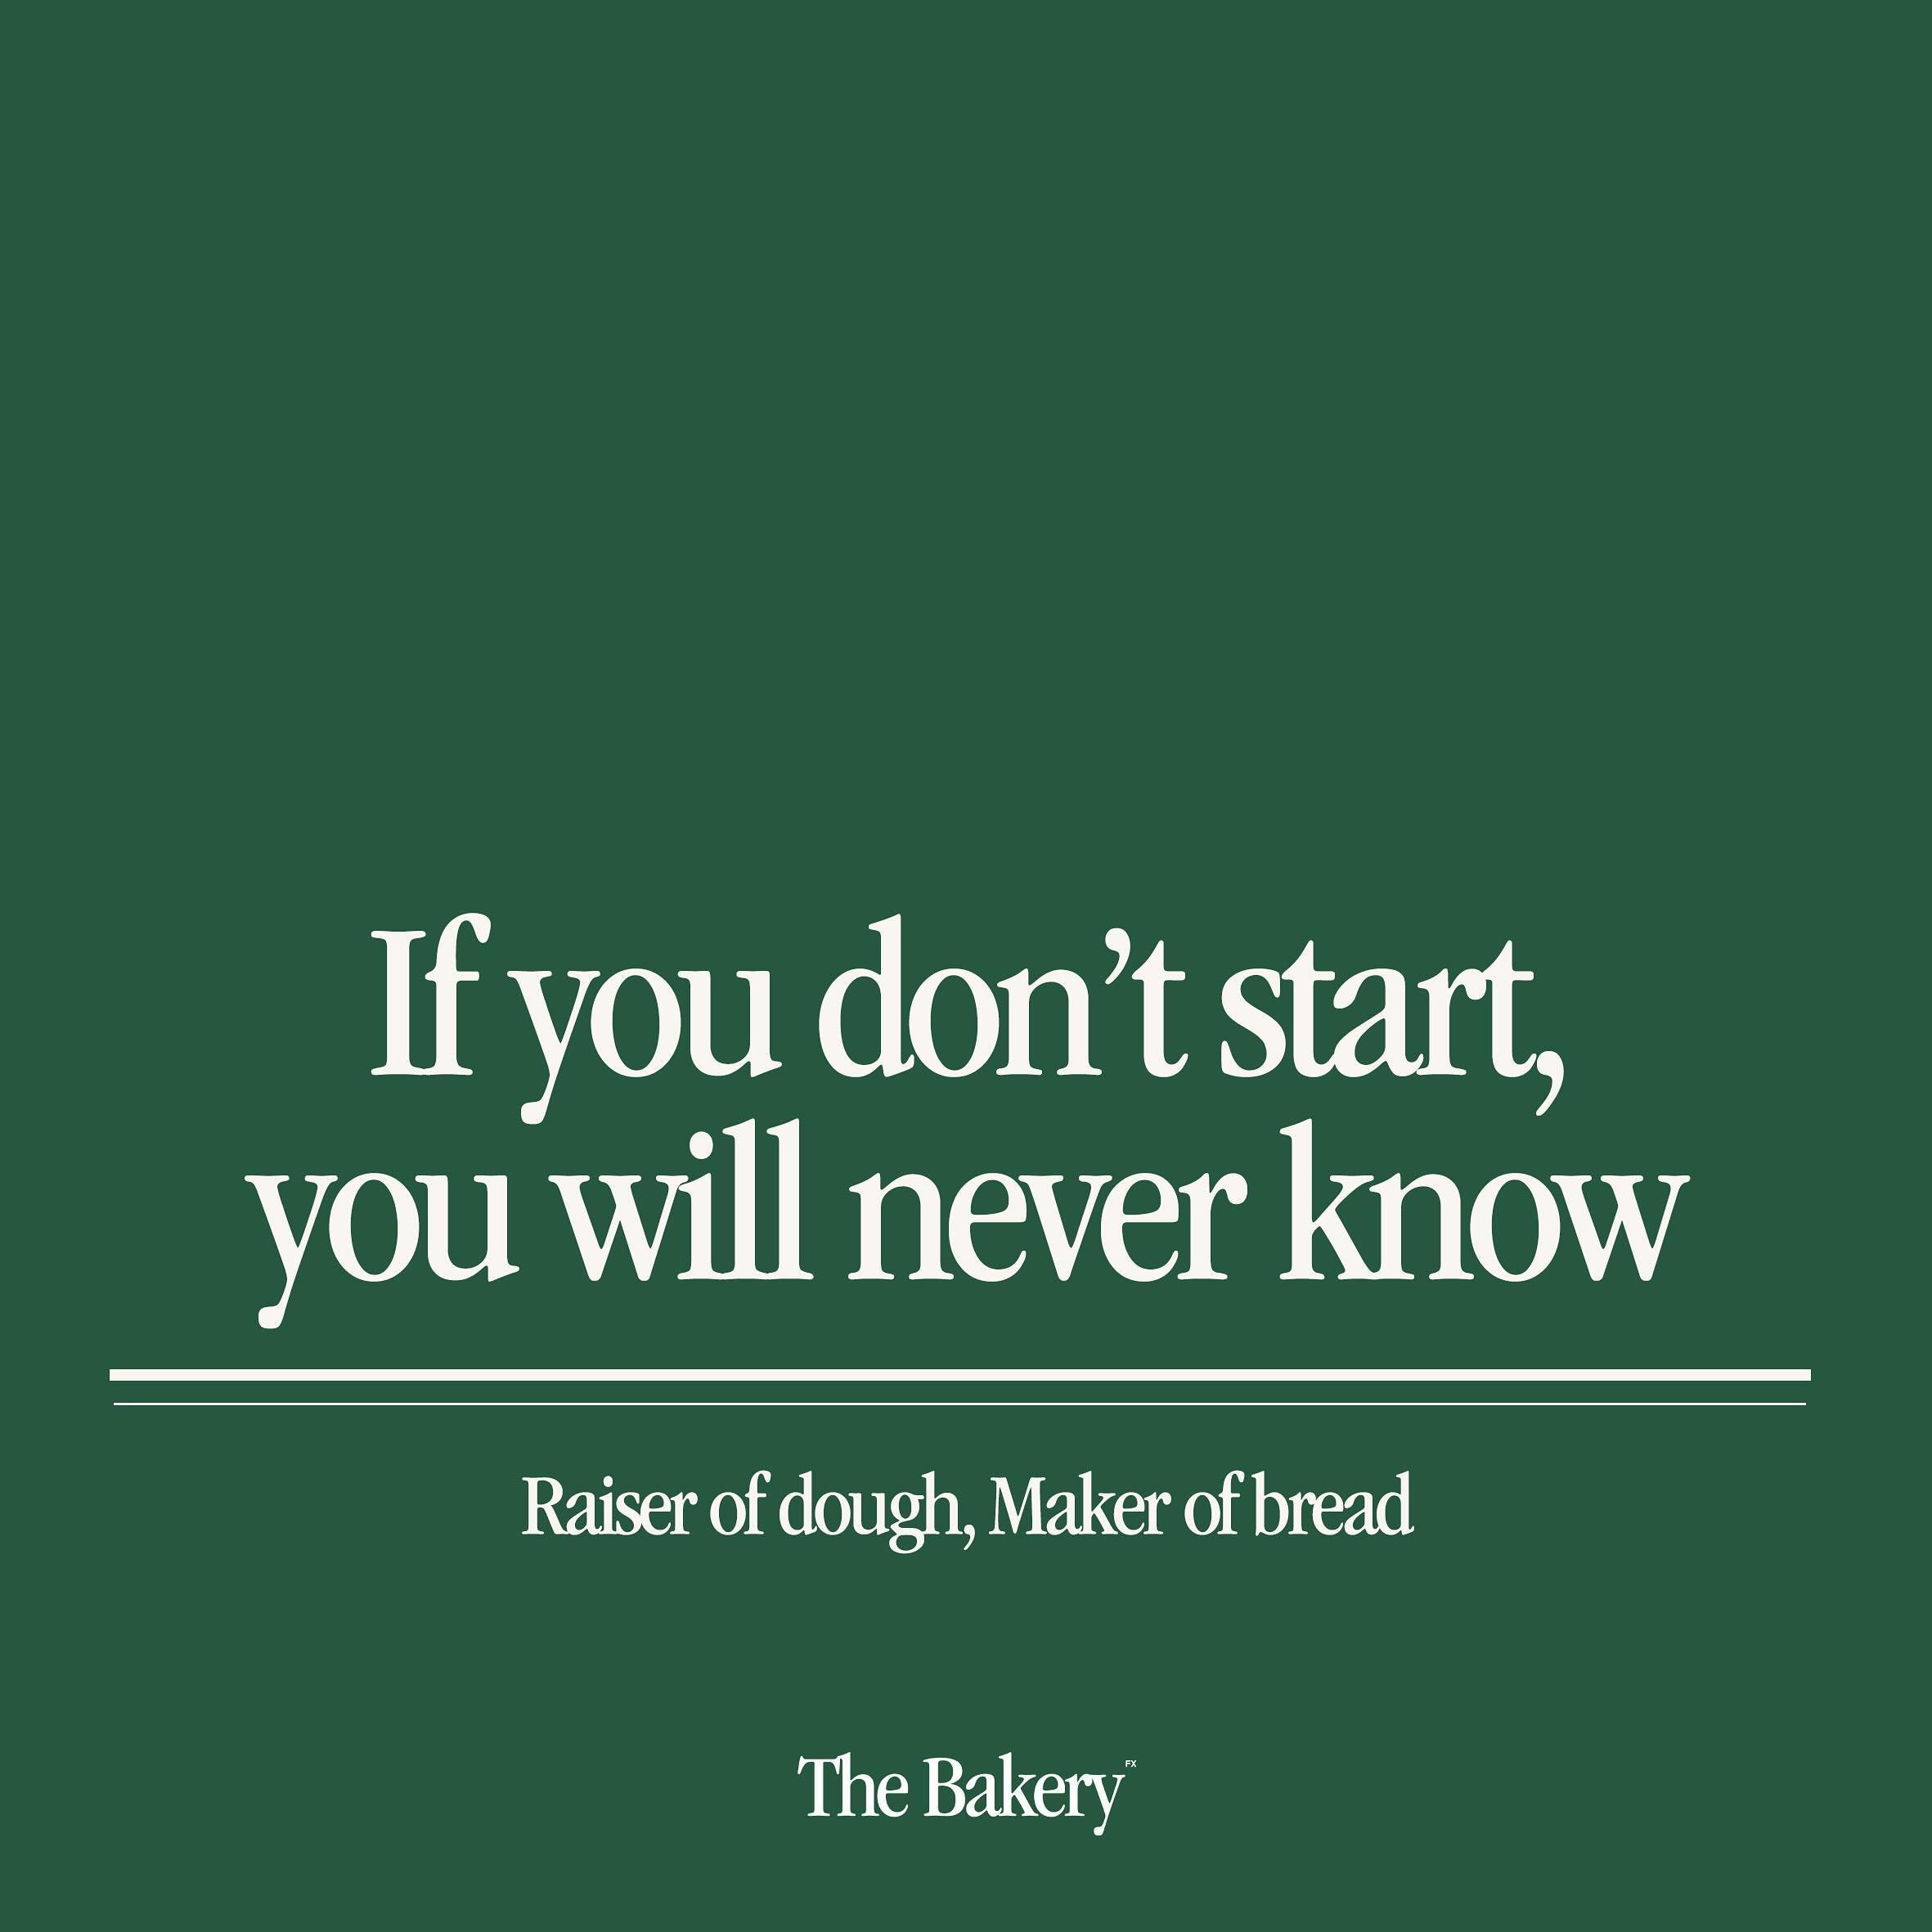 If you don&rsquo;t start, you will never know. 💫

Are you ready to raise your trading game? 

At The Bakery, we help new &amp; existing traders find profitability by exposing them to a statistically backed framework and equipping them with the tools